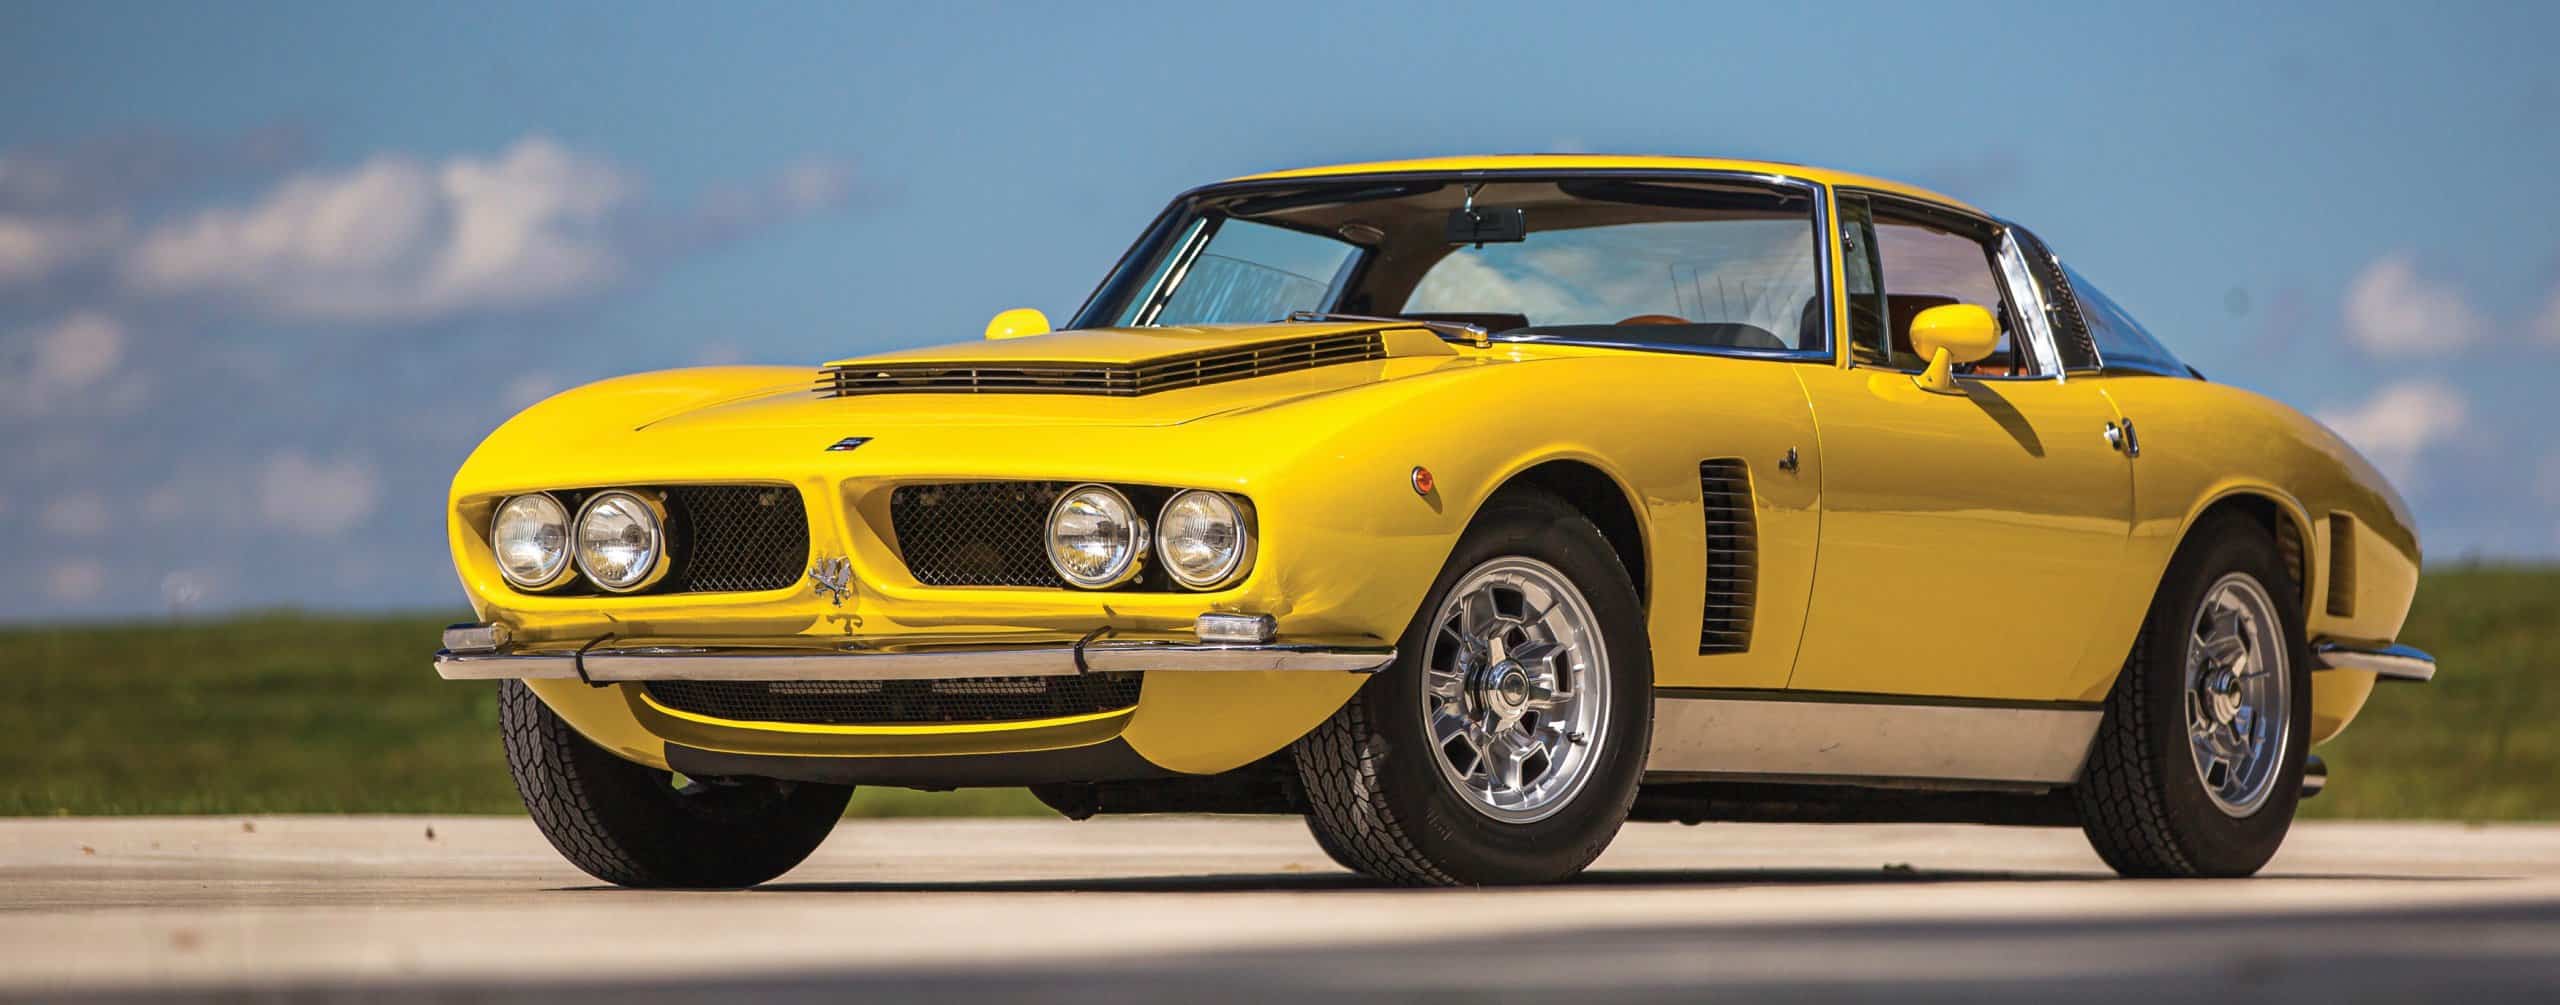 RM Sotheby, RM Sotheby’s will offer single-owner collection of 230 cars, ClassicCars.com Journal